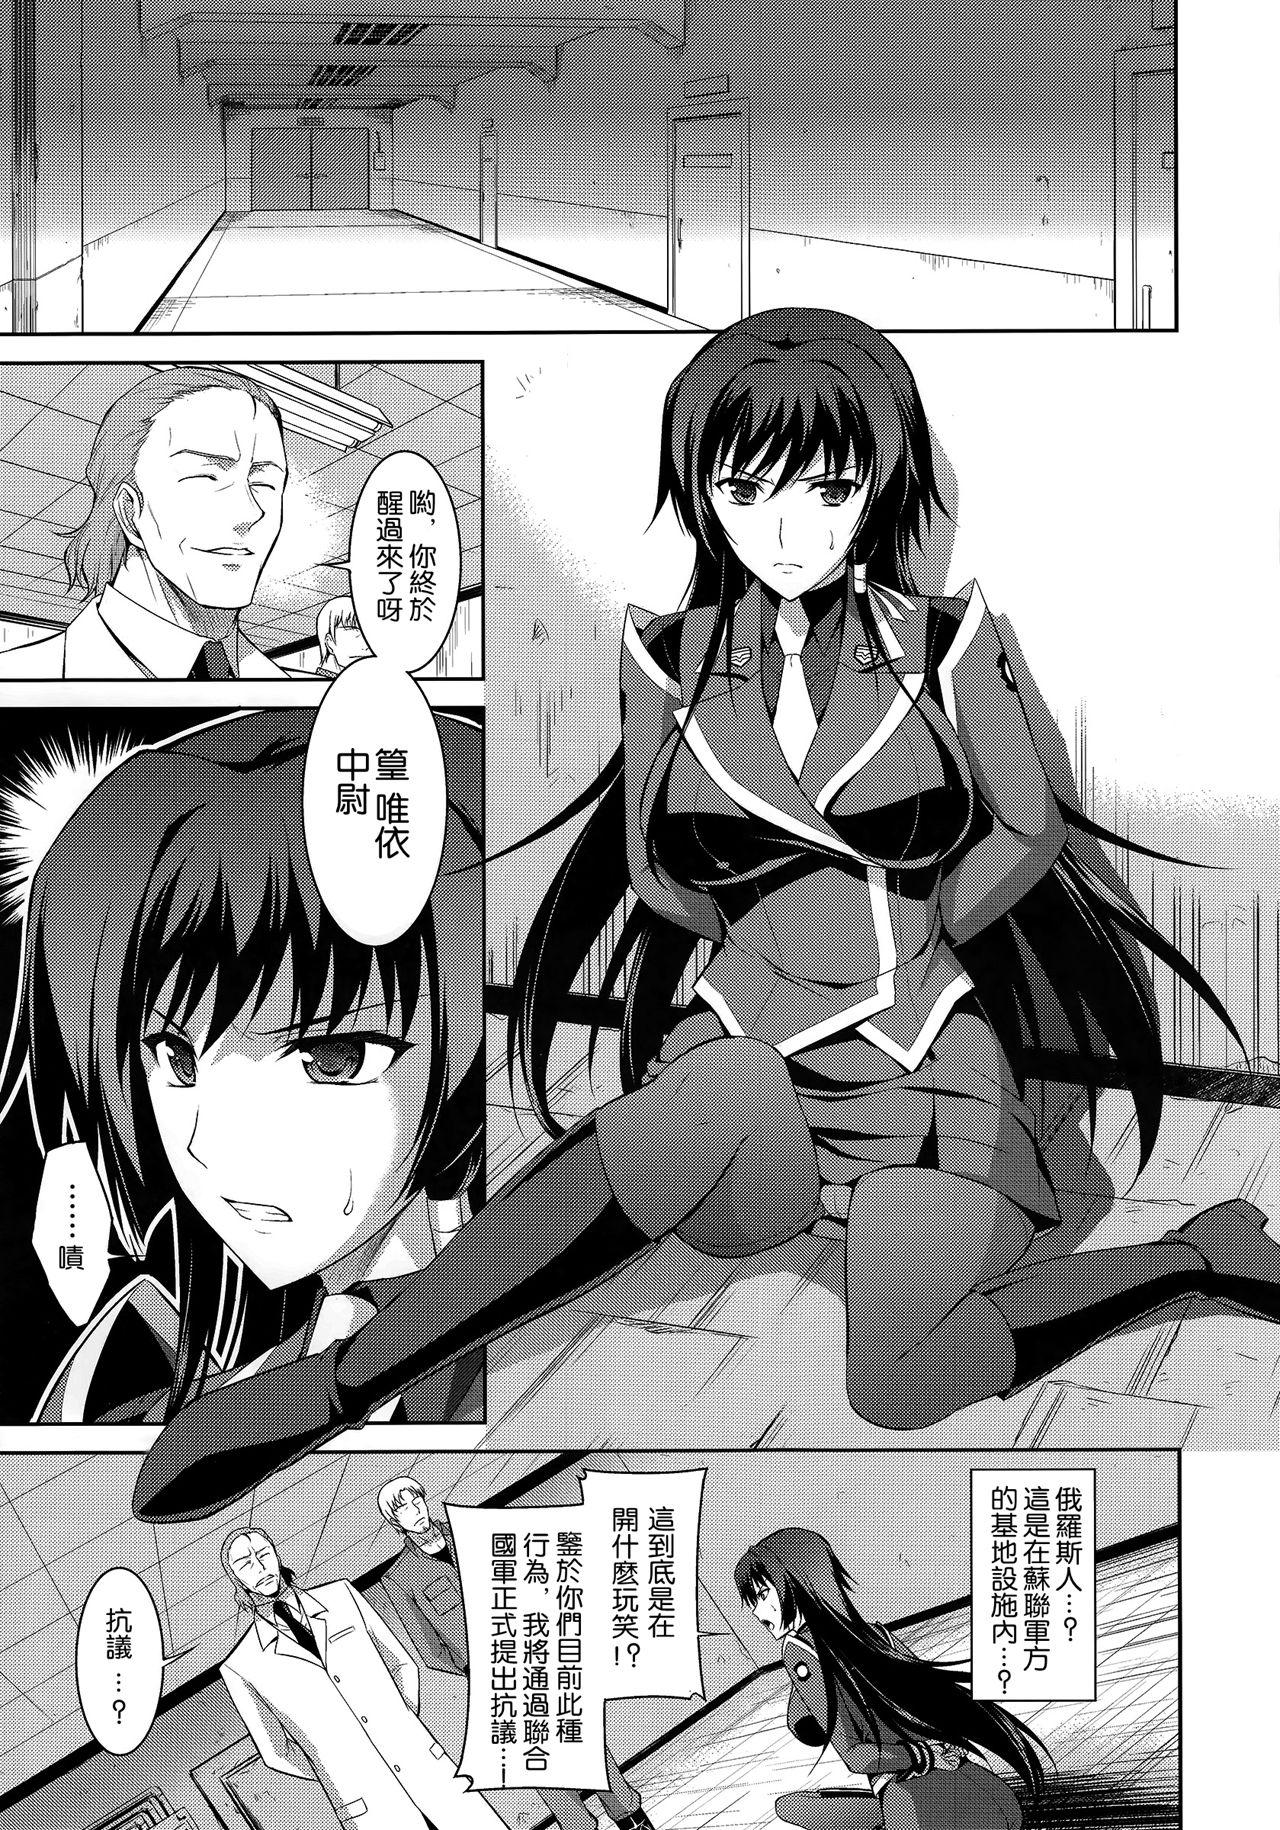 Wet Cunts Ouka Chiru! - Muv-luv alternative total eclipse Big Ass - Page 5